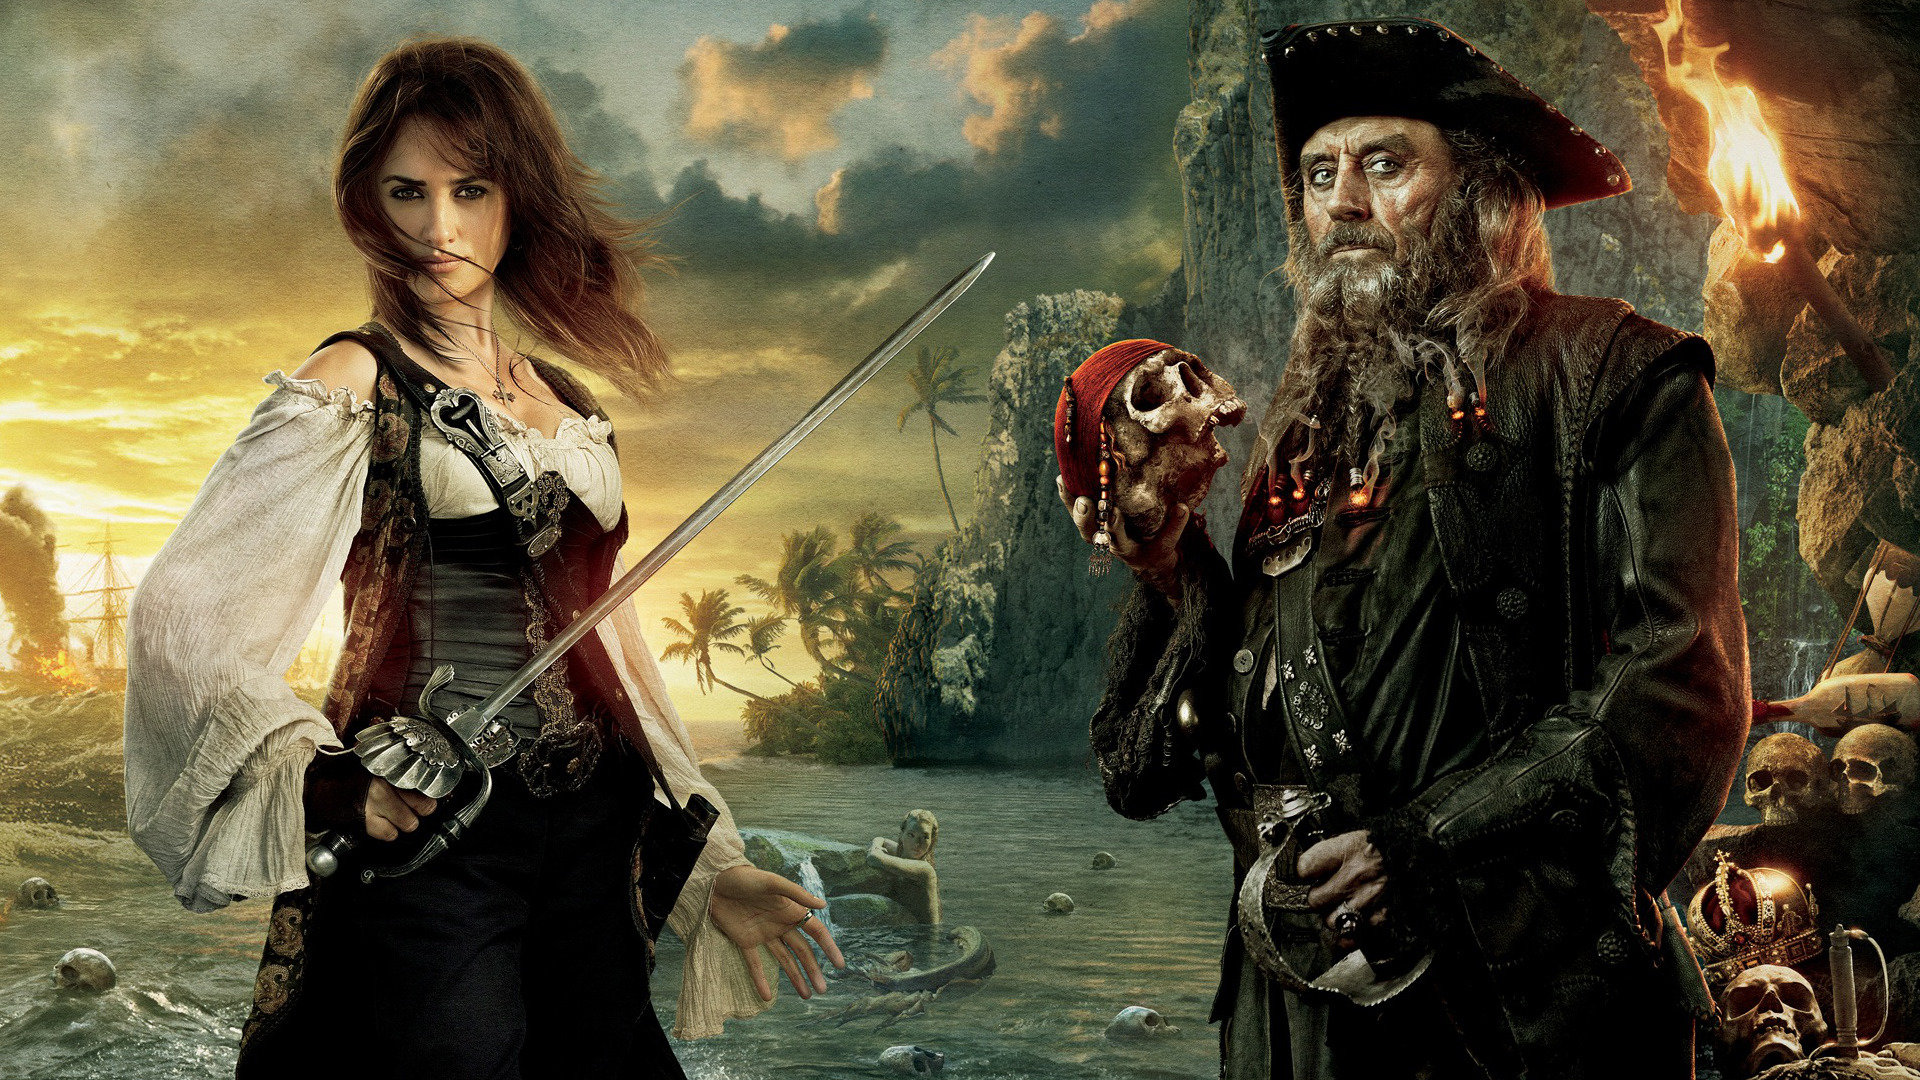 Download full hd 1920x1080 Pirates Of The Caribbean: On Stranger Tides PC wallpaper ID:61871 for free